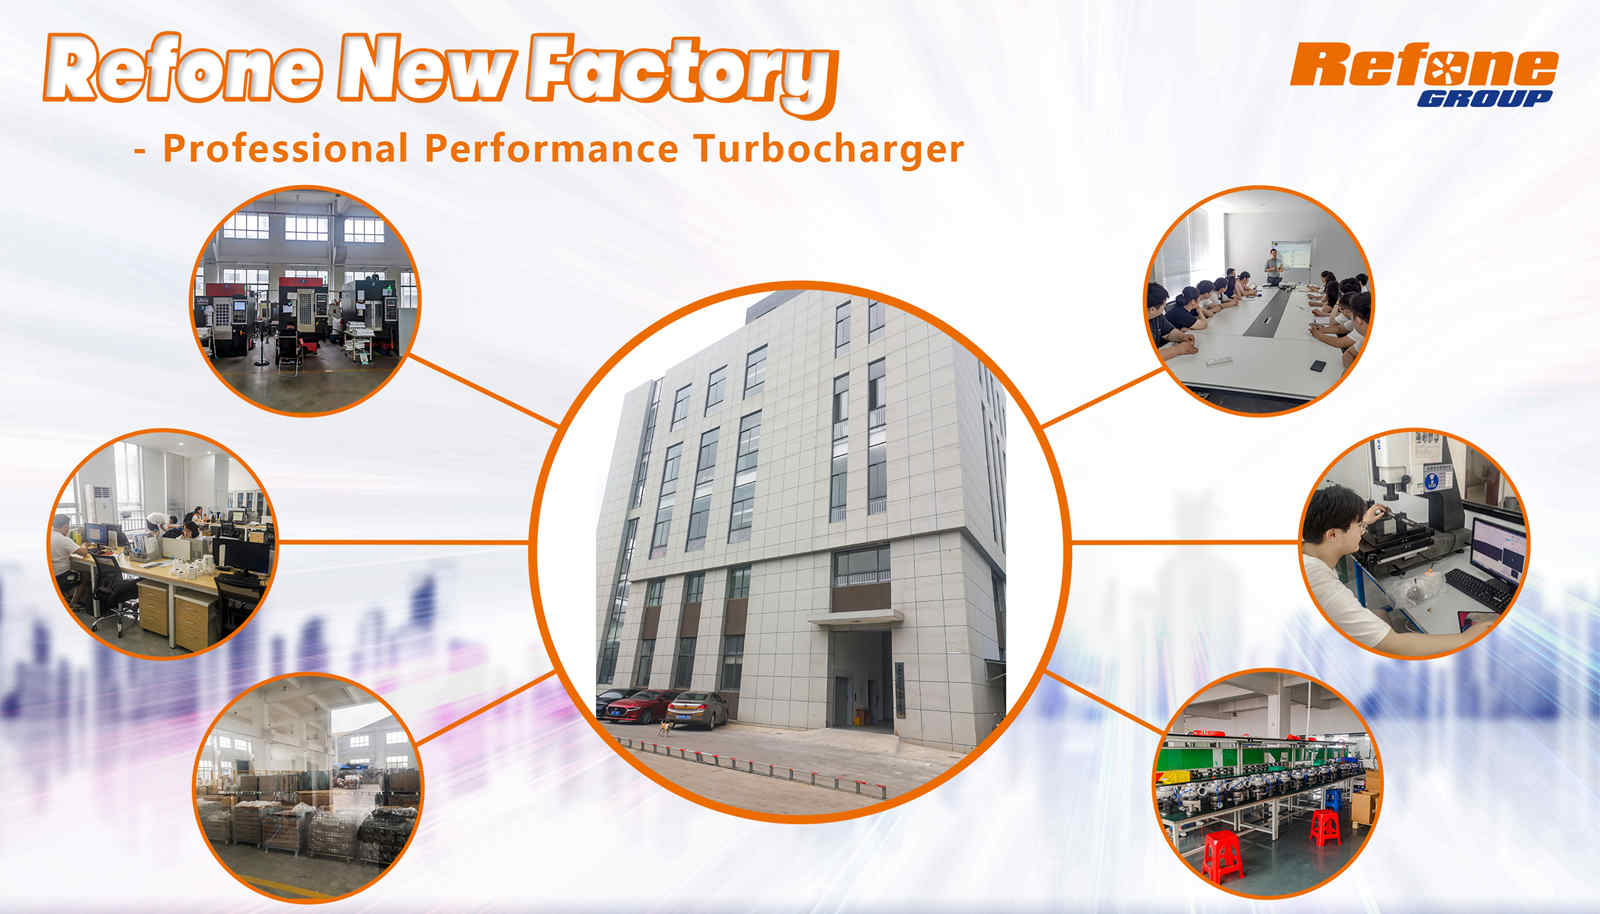 Refone New Factory - Professional Performance Turbocharger 